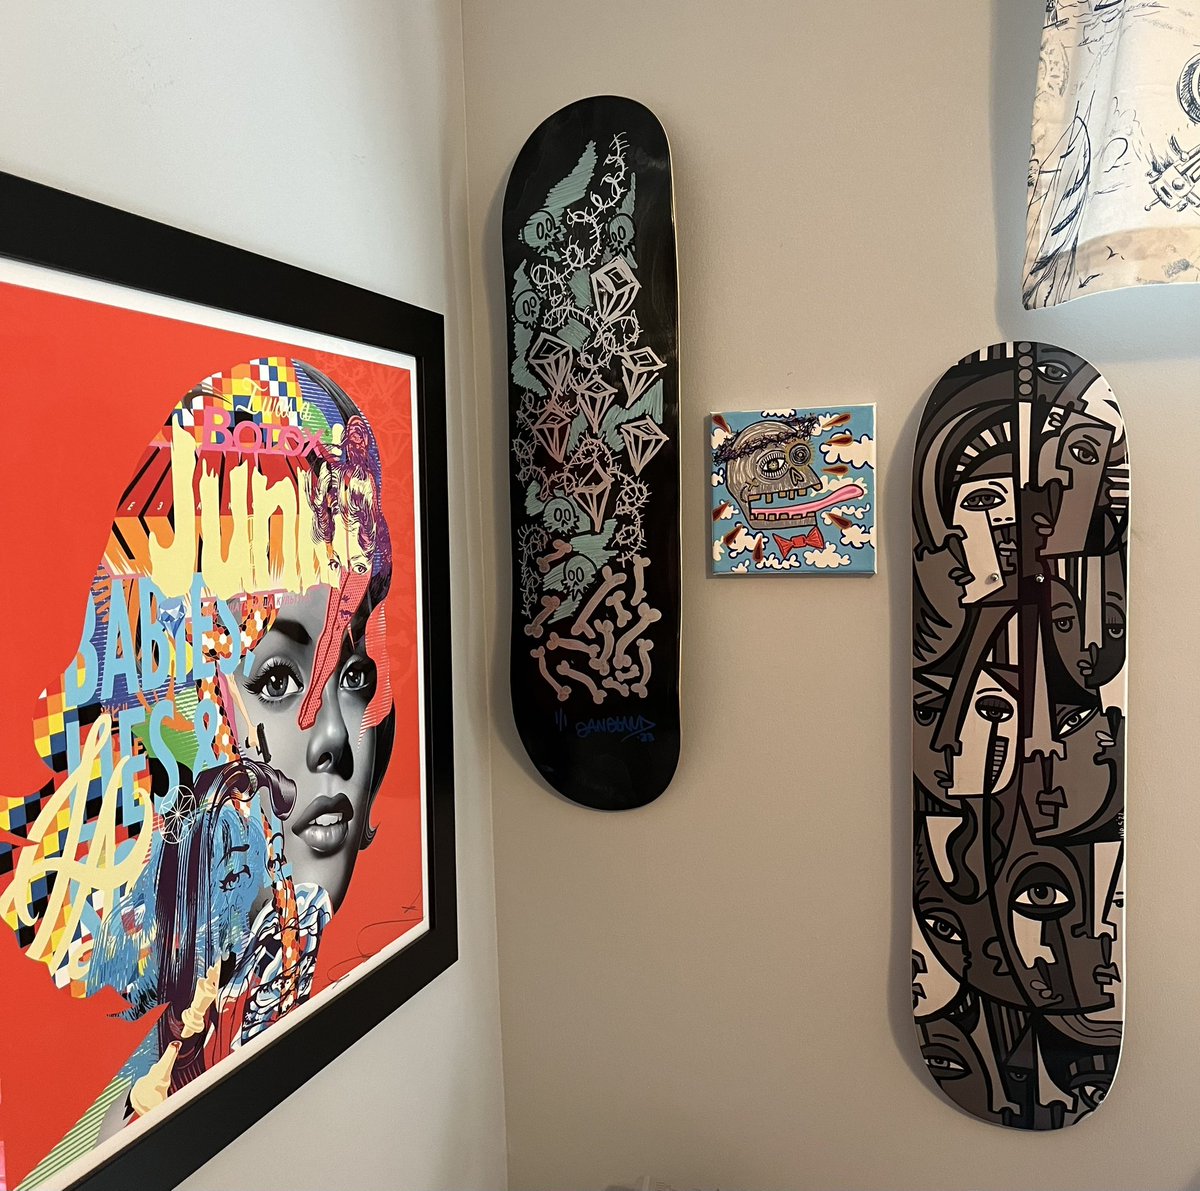 Made some updates to the home office gallery💥 My signed @Gemma_NFT by @tristaneaton looks really good next to my 1/1 @eddiegangland skateboard deck, 'The Chosen One' from 2021 by Eddie Gangland, and @TheStoicsNFT skateboard deck by @GabrielJWeis 🤌